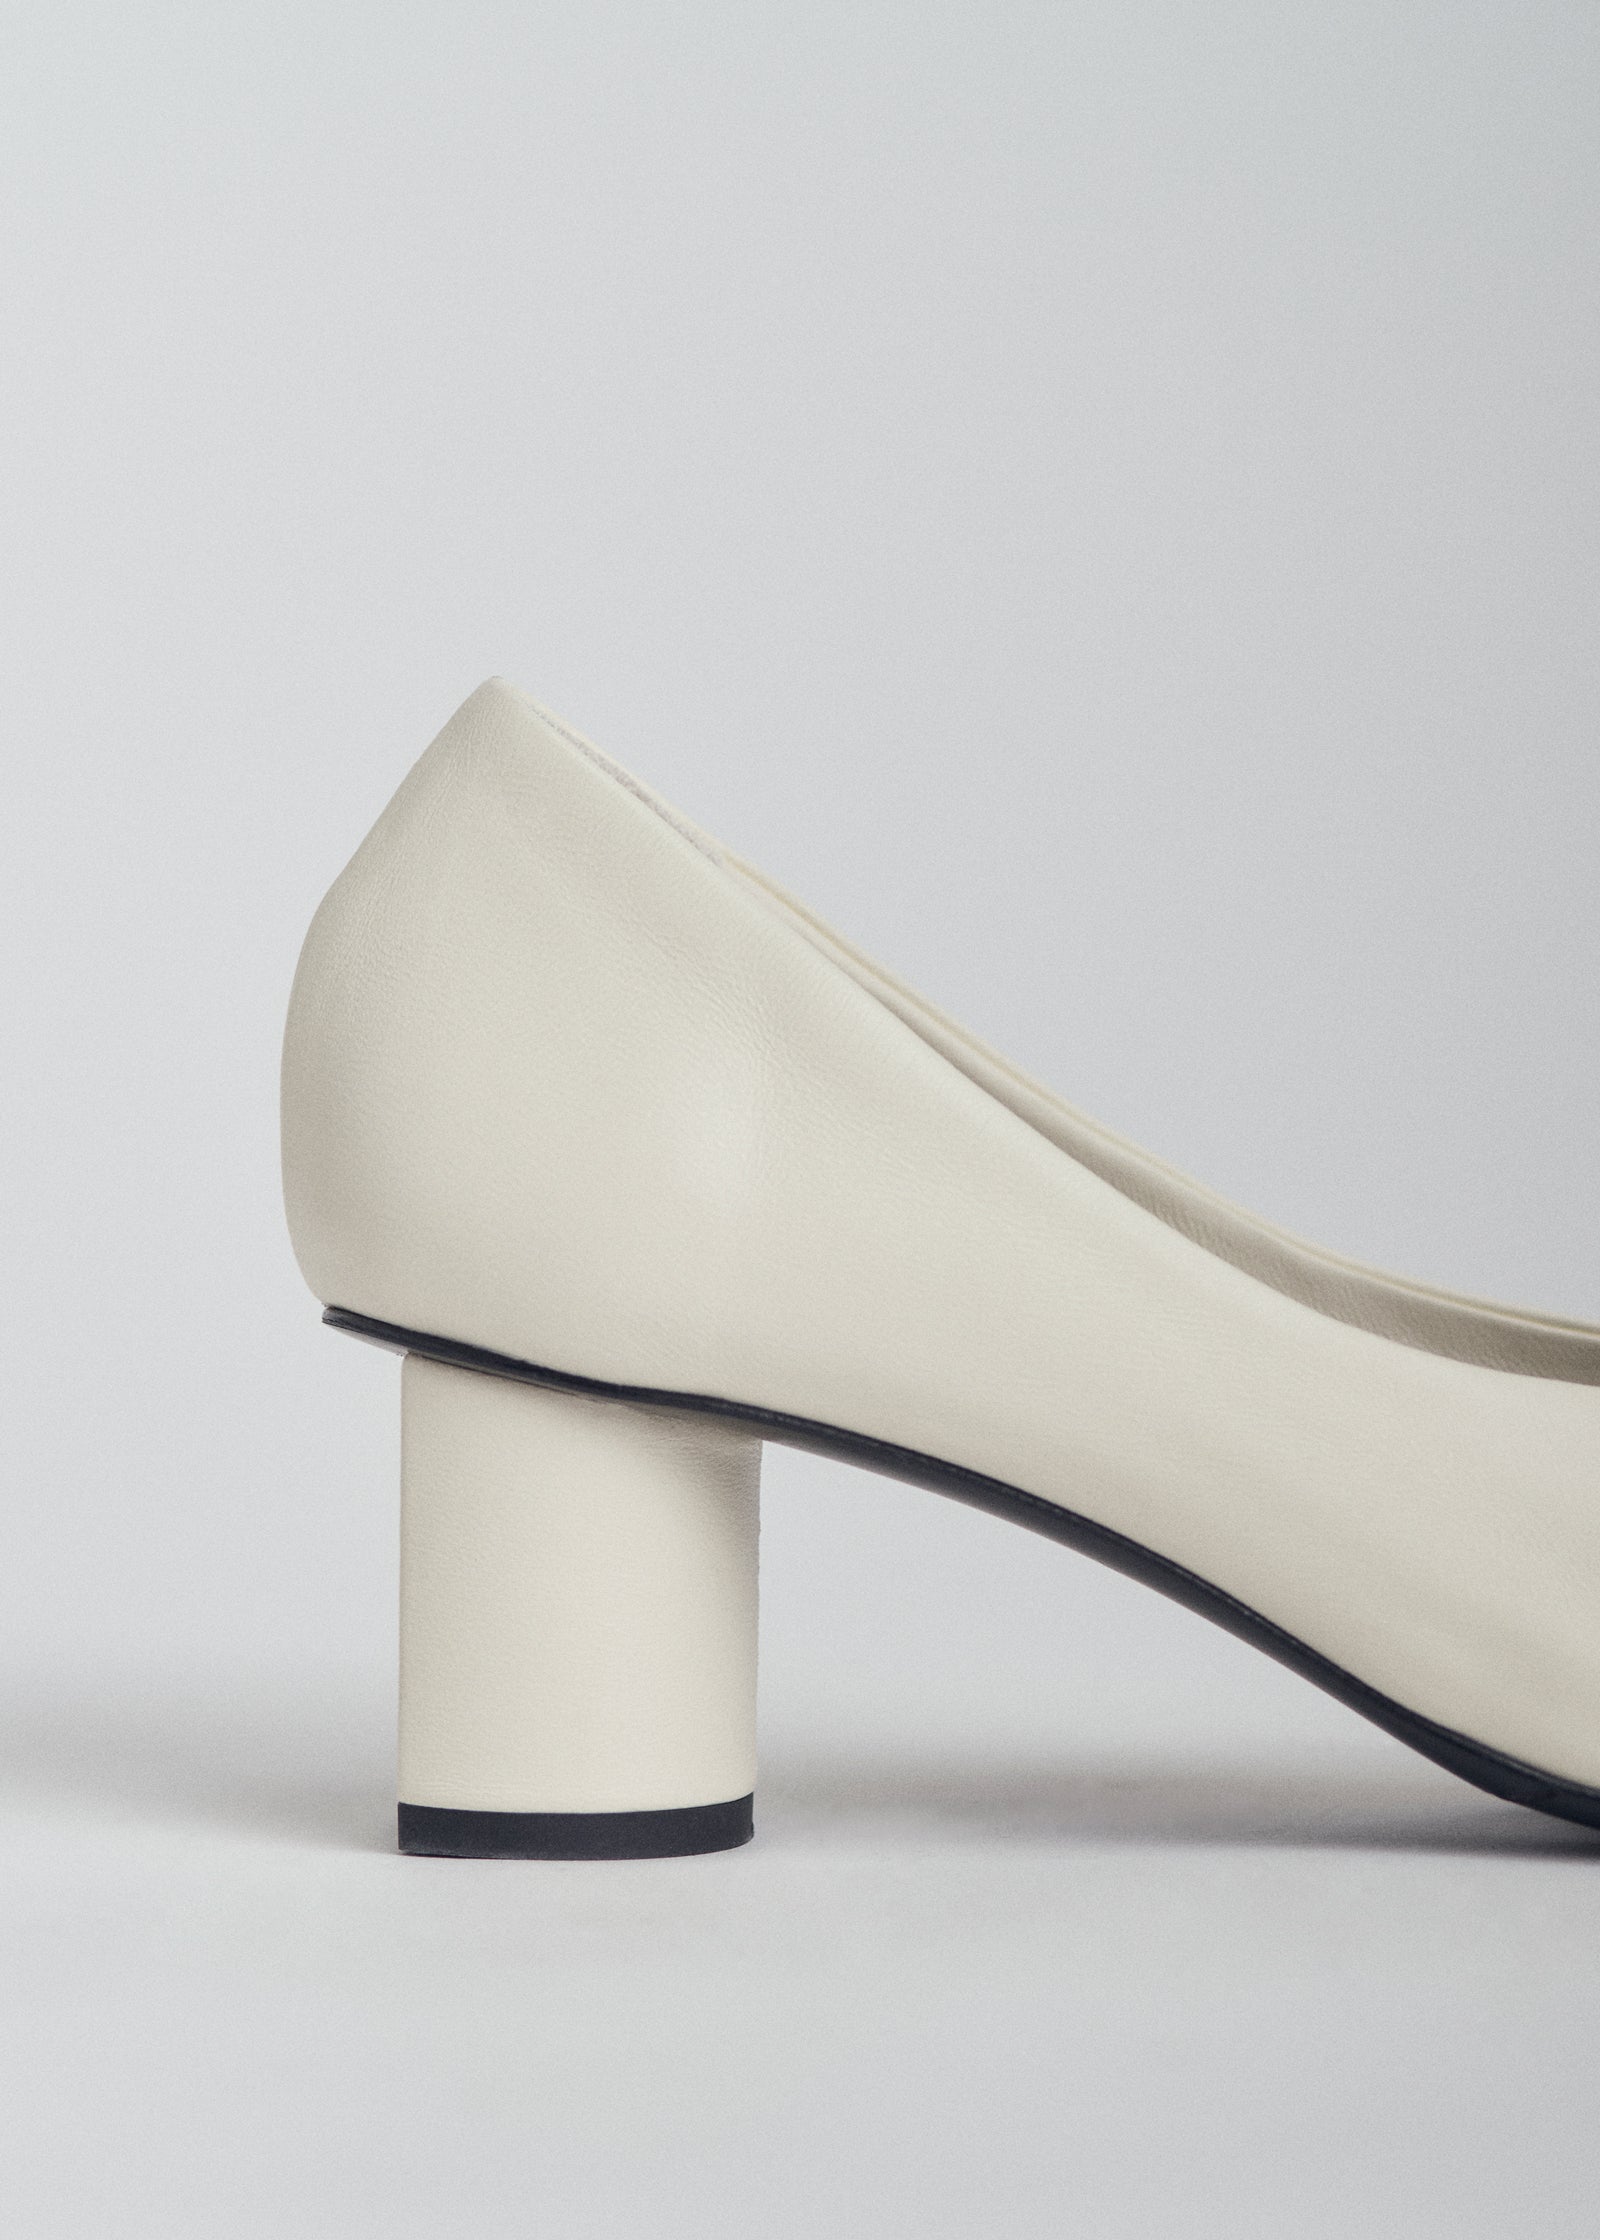 Pump Heel in Smooth Leather - Ivory - CO Collections